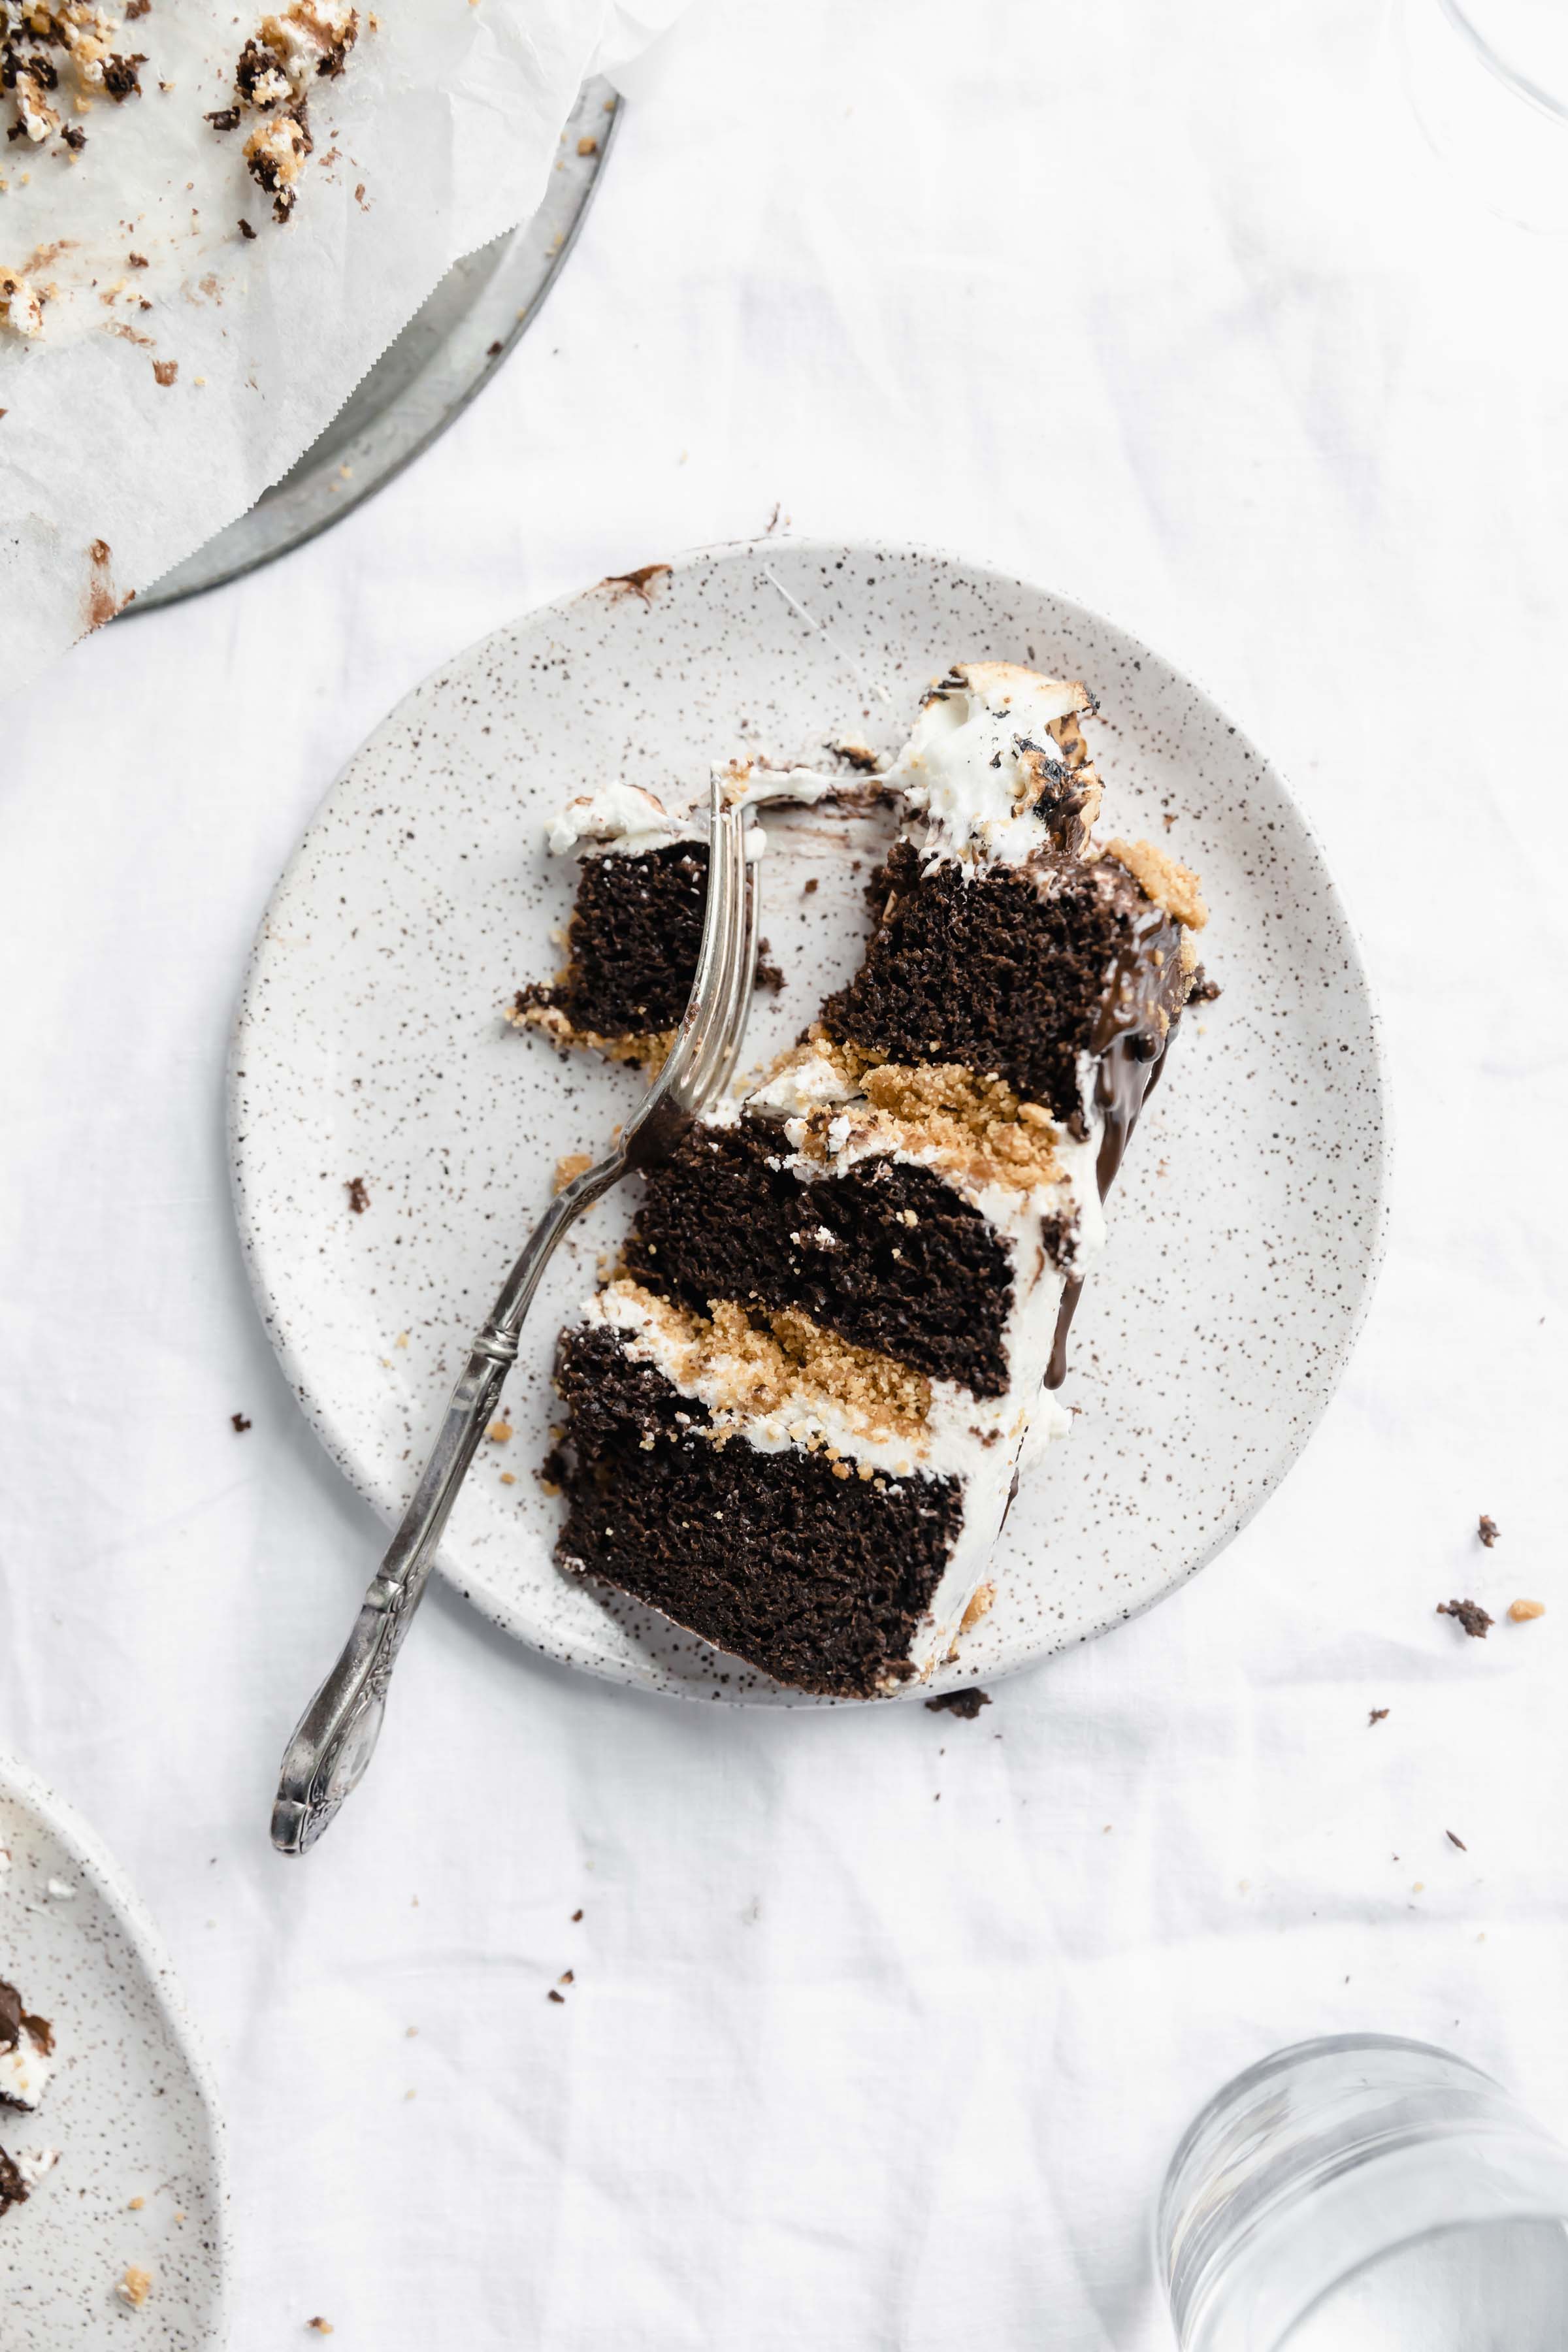 Slice of s’mores Cake